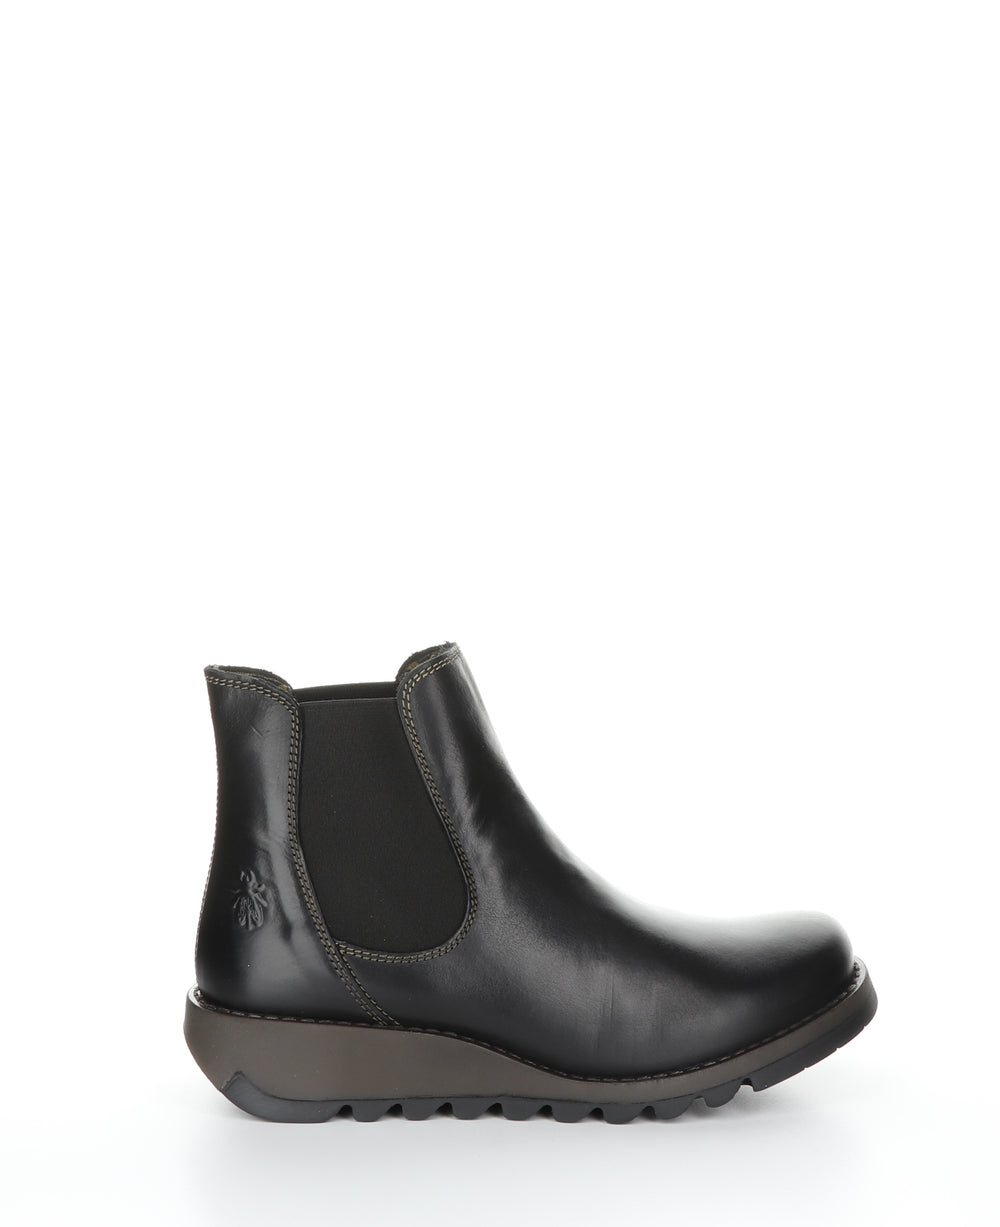 SALV Black Round Toe Ankle Boots